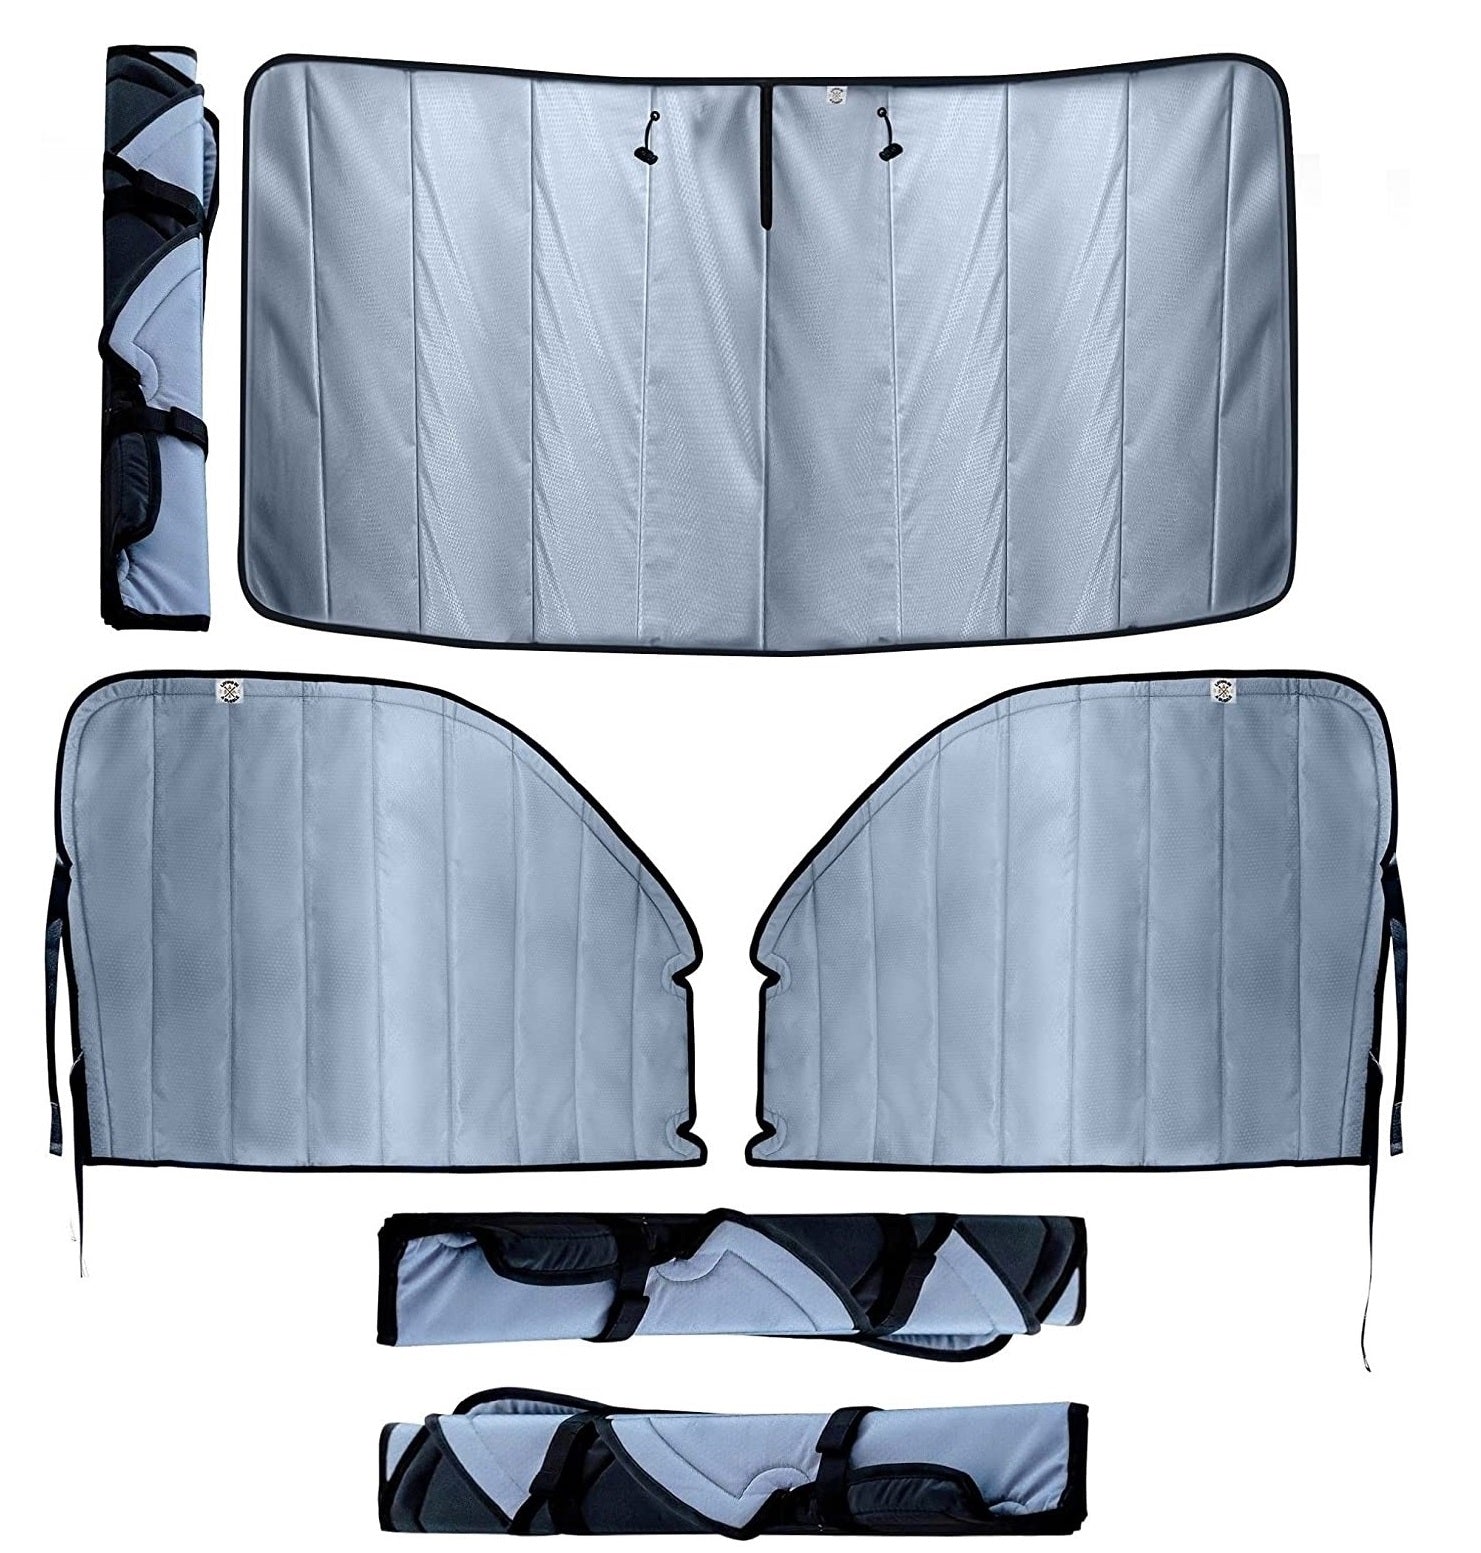 Insulated Window Covers 2 Products Bundle - Cab Set